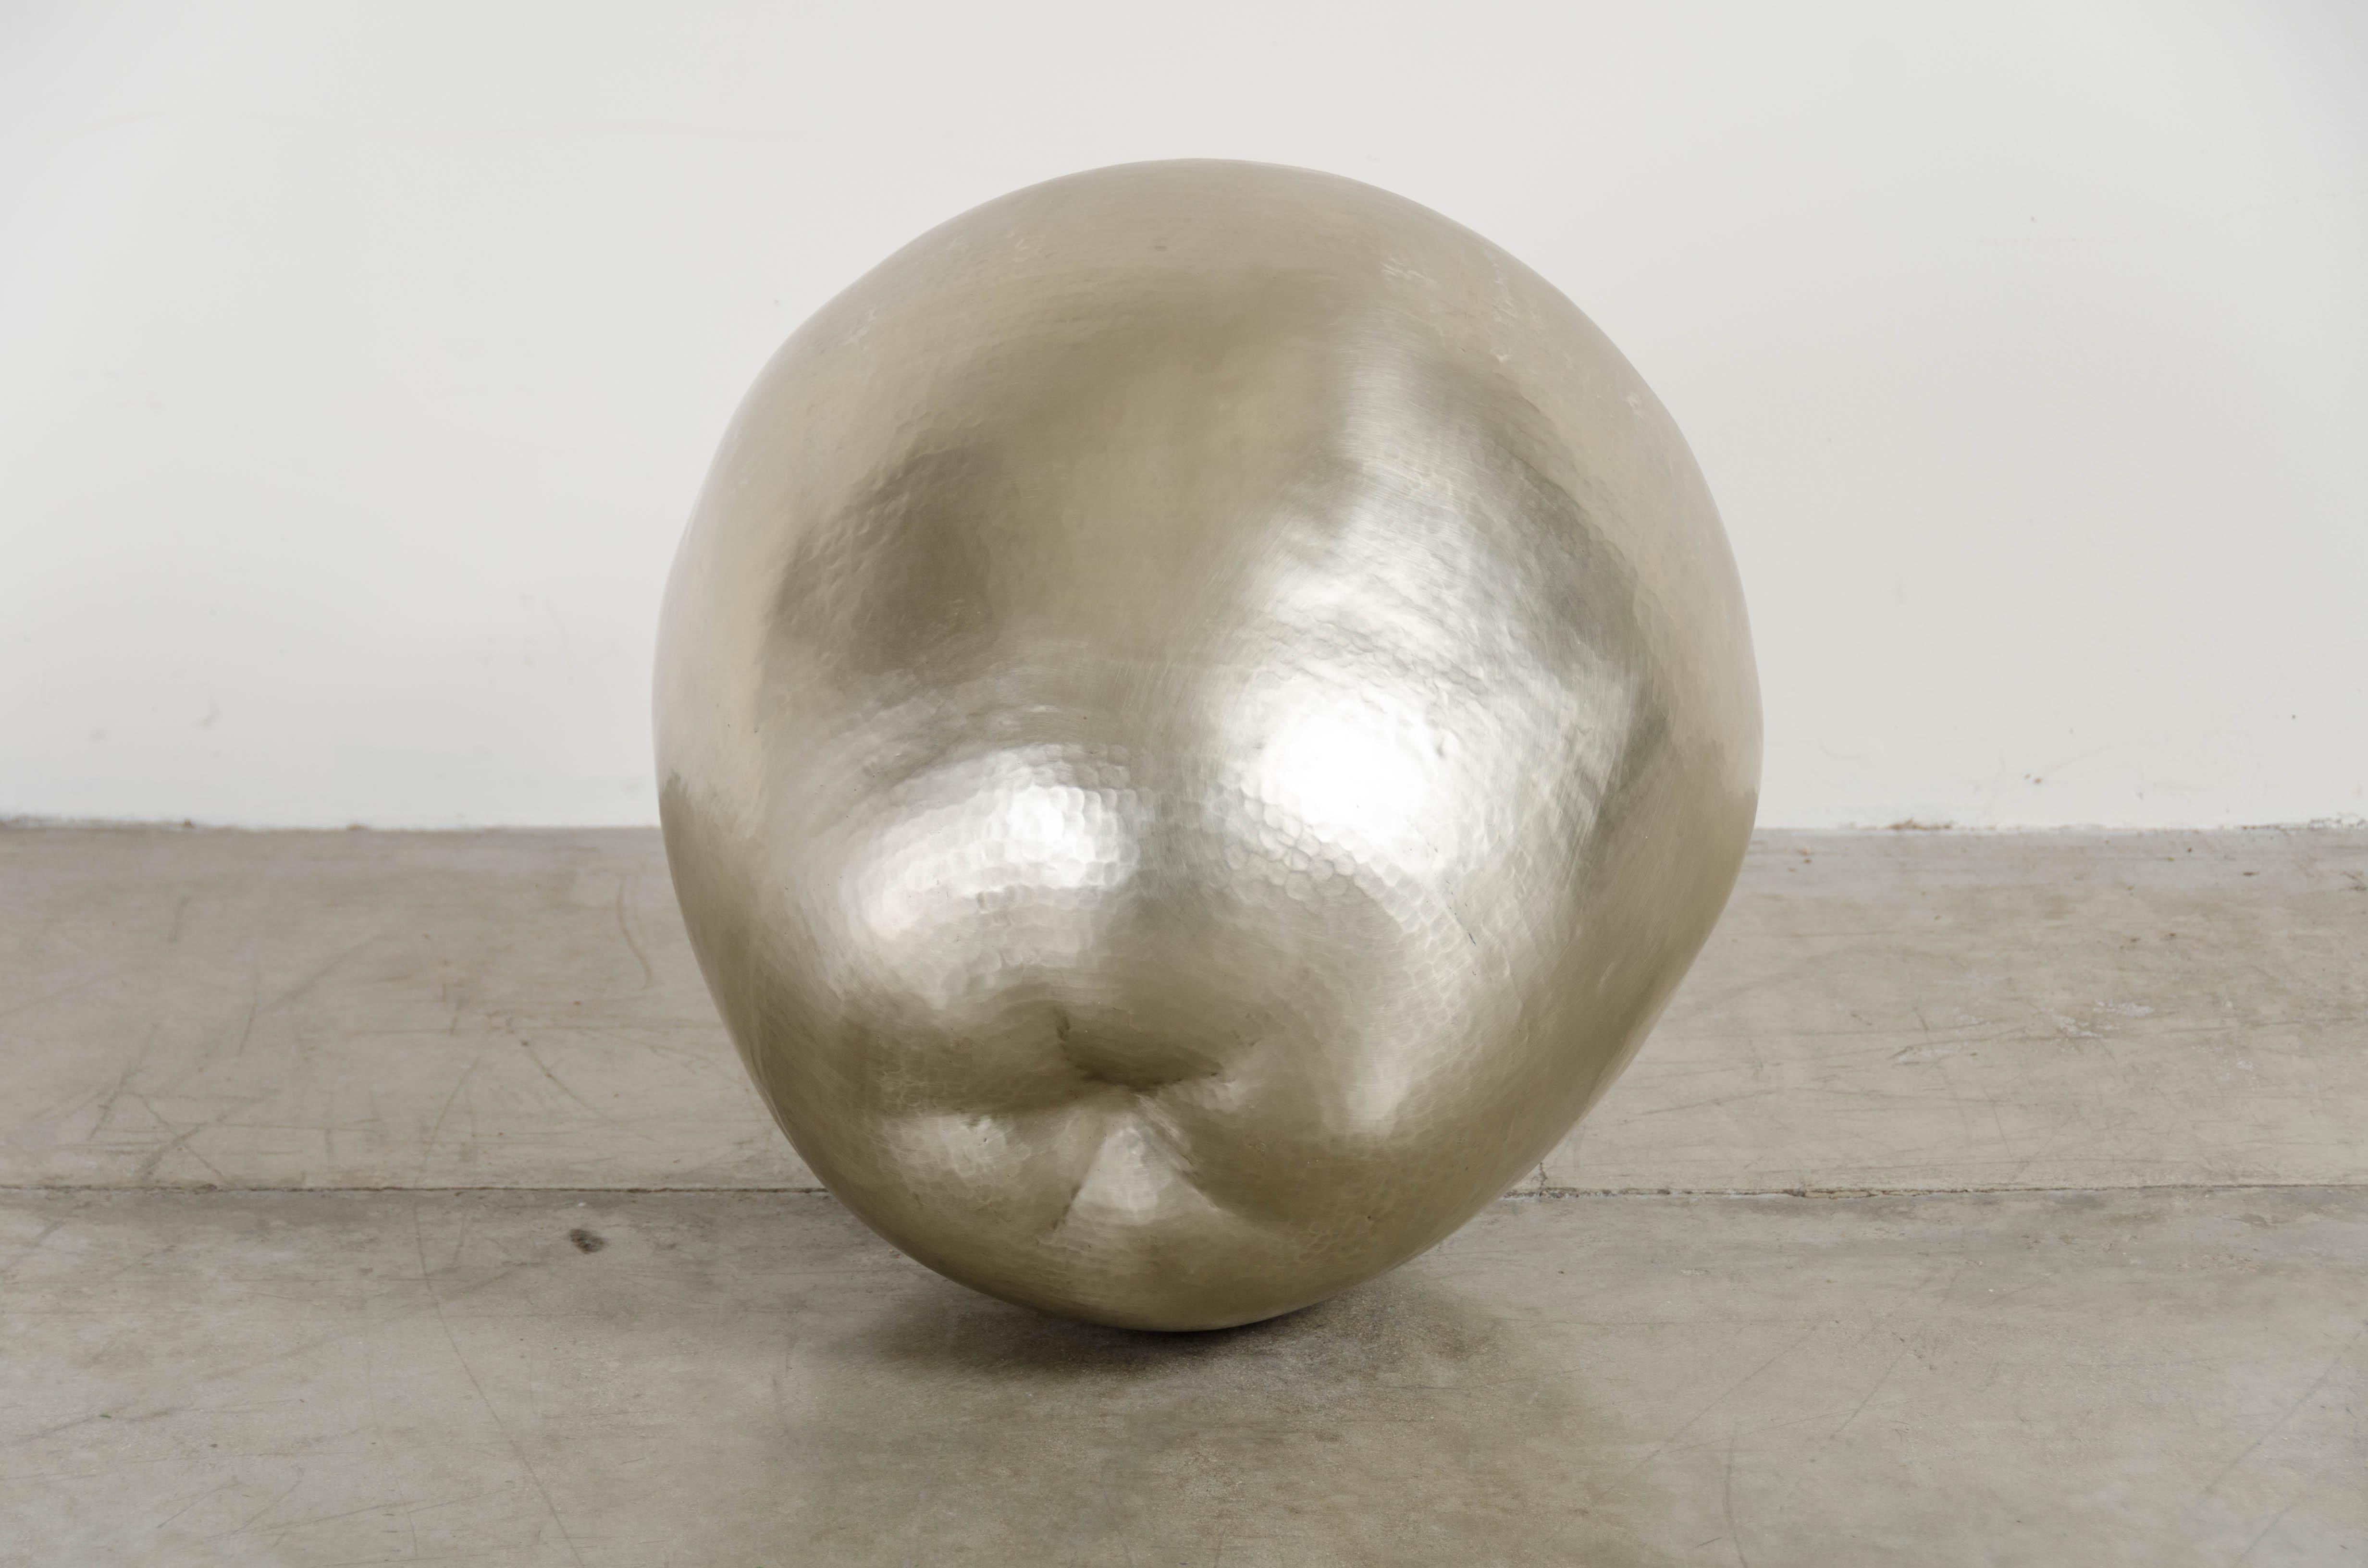 Repoussé Apple Sculpture, White Bronze by Robert Kuo, Hand Repousse, Limited Edition For Sale